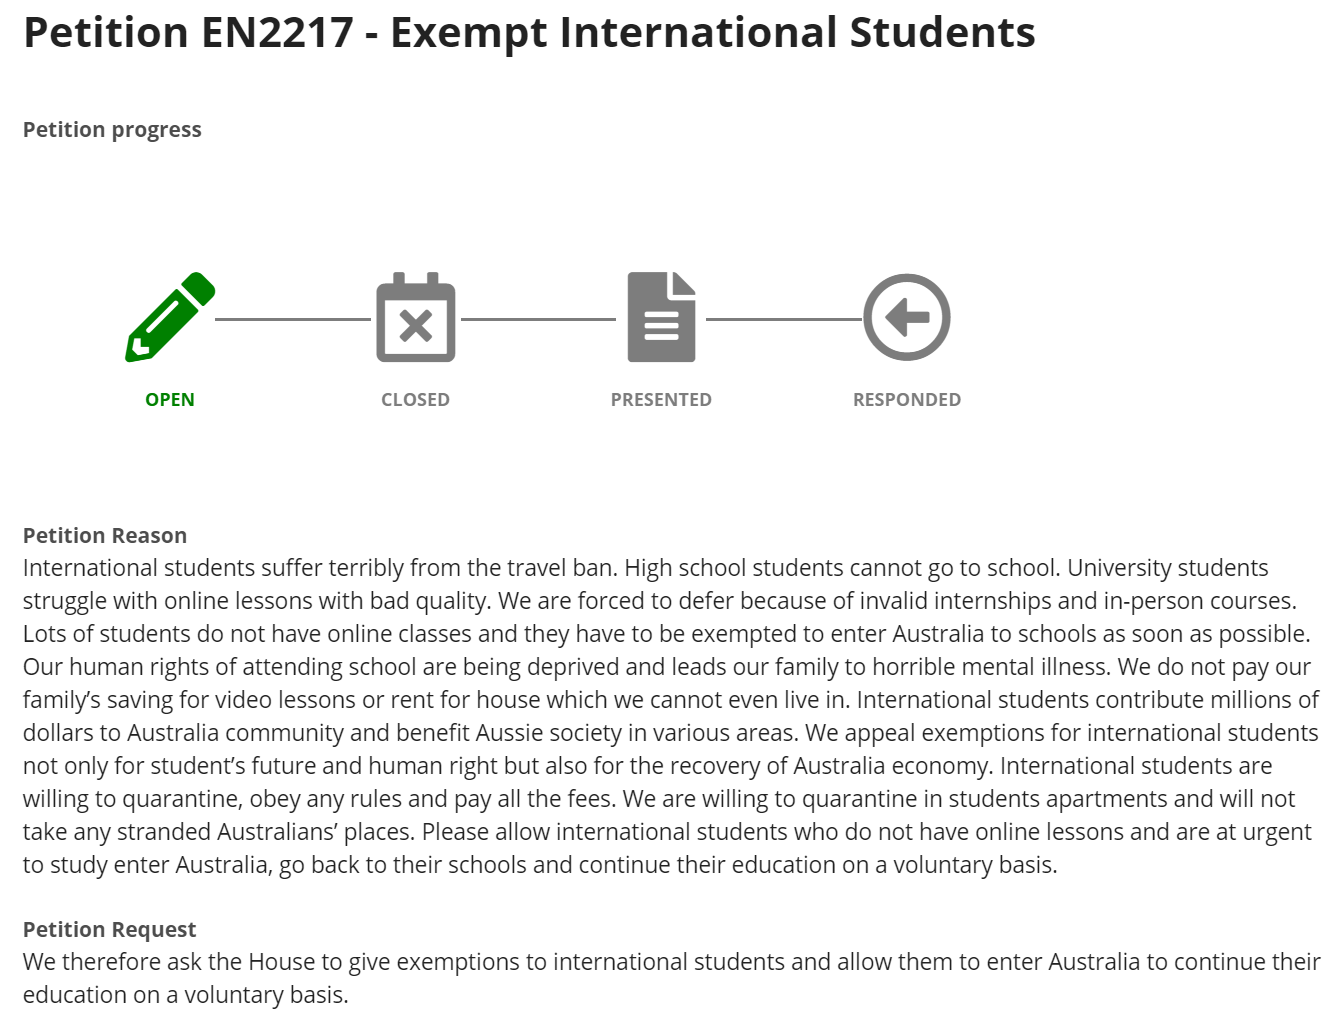 Petition call for exempt international students